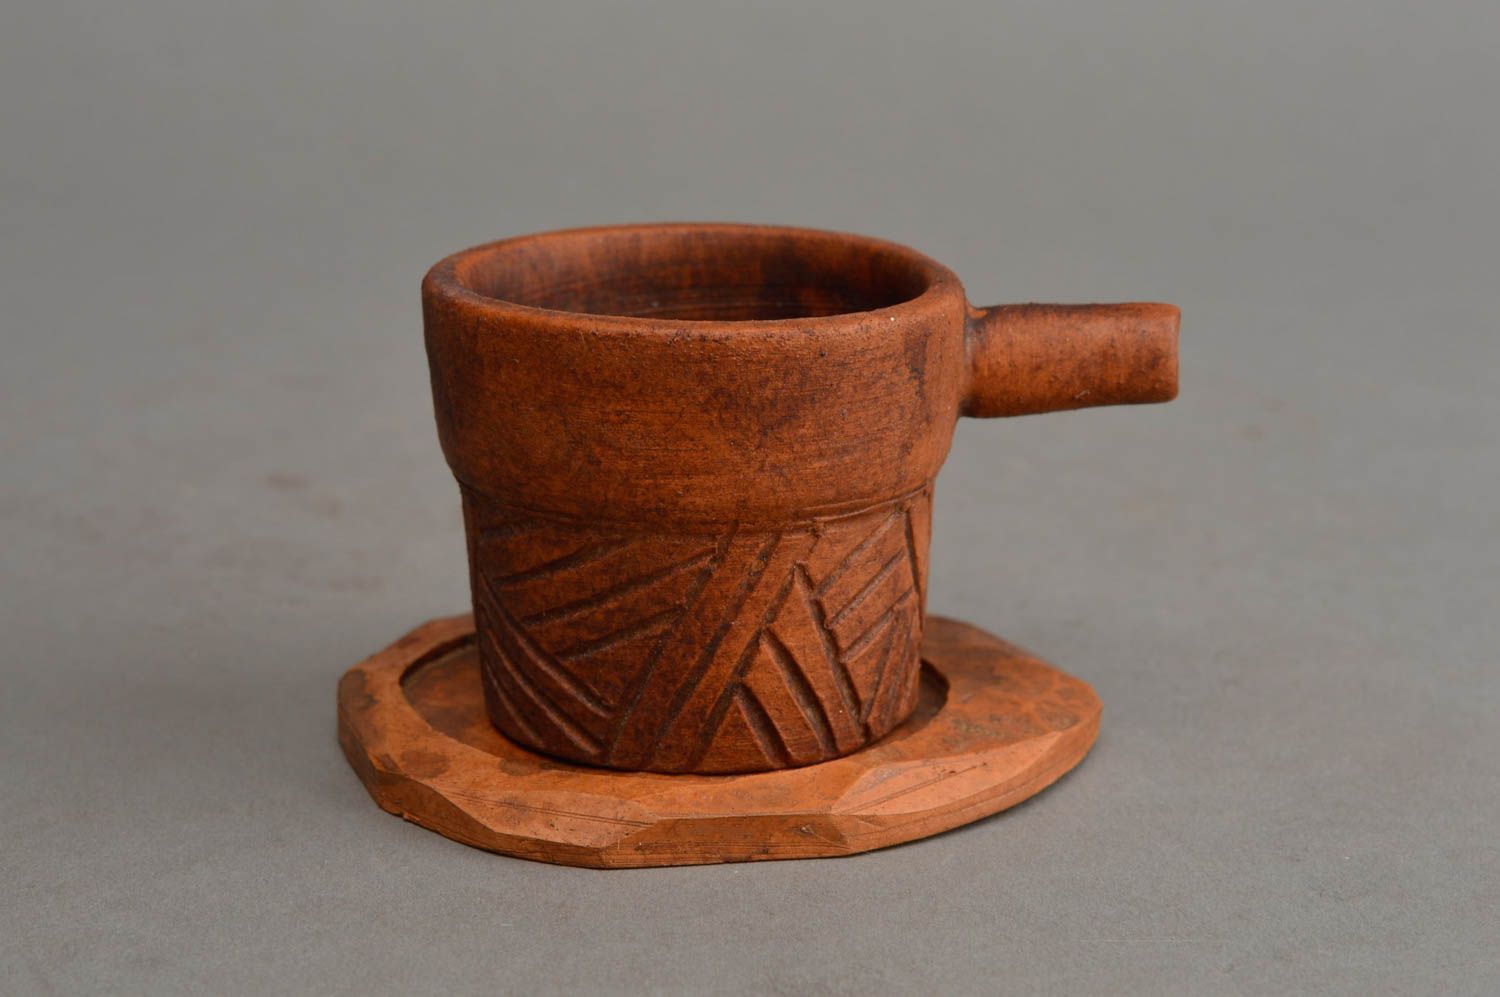 Art clay nonglazed espresso coffee cup with handle, saucer, and handle in the shape of the stick photo 2